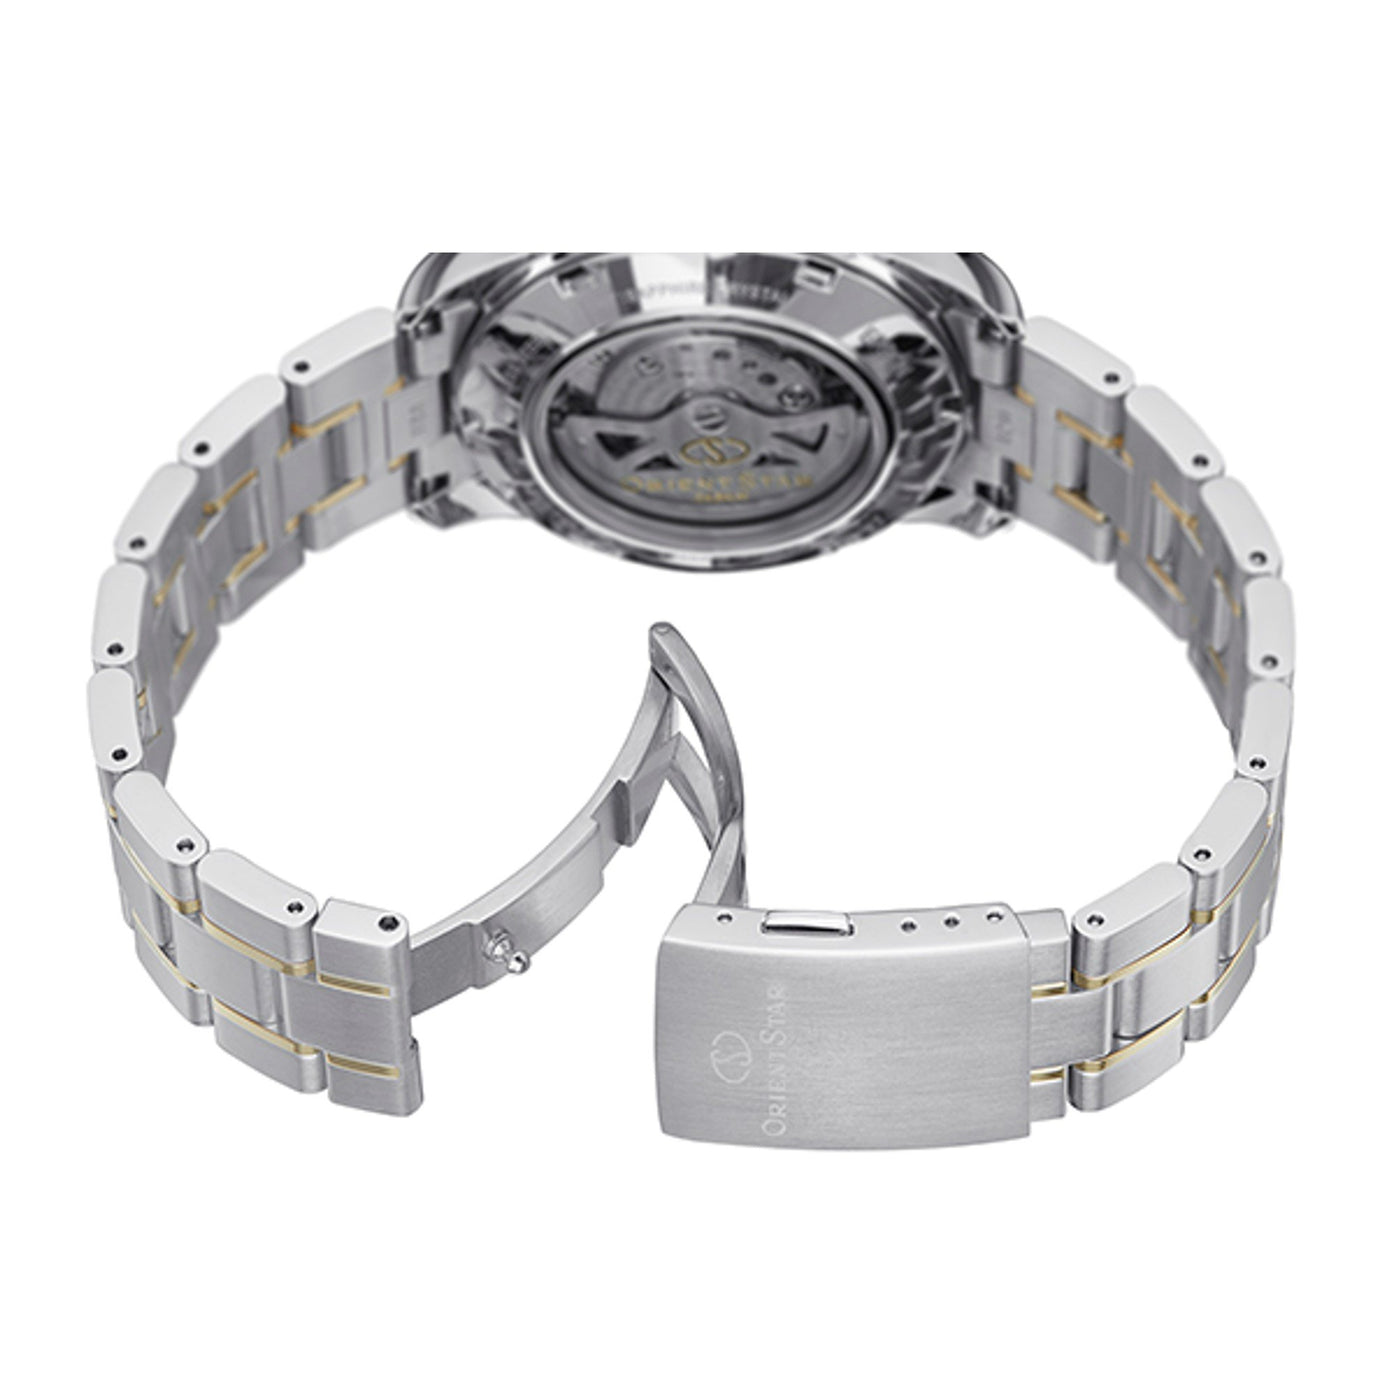 Mechanical Sports Semiskeleton Automatic 41mm Stainless Steel Band